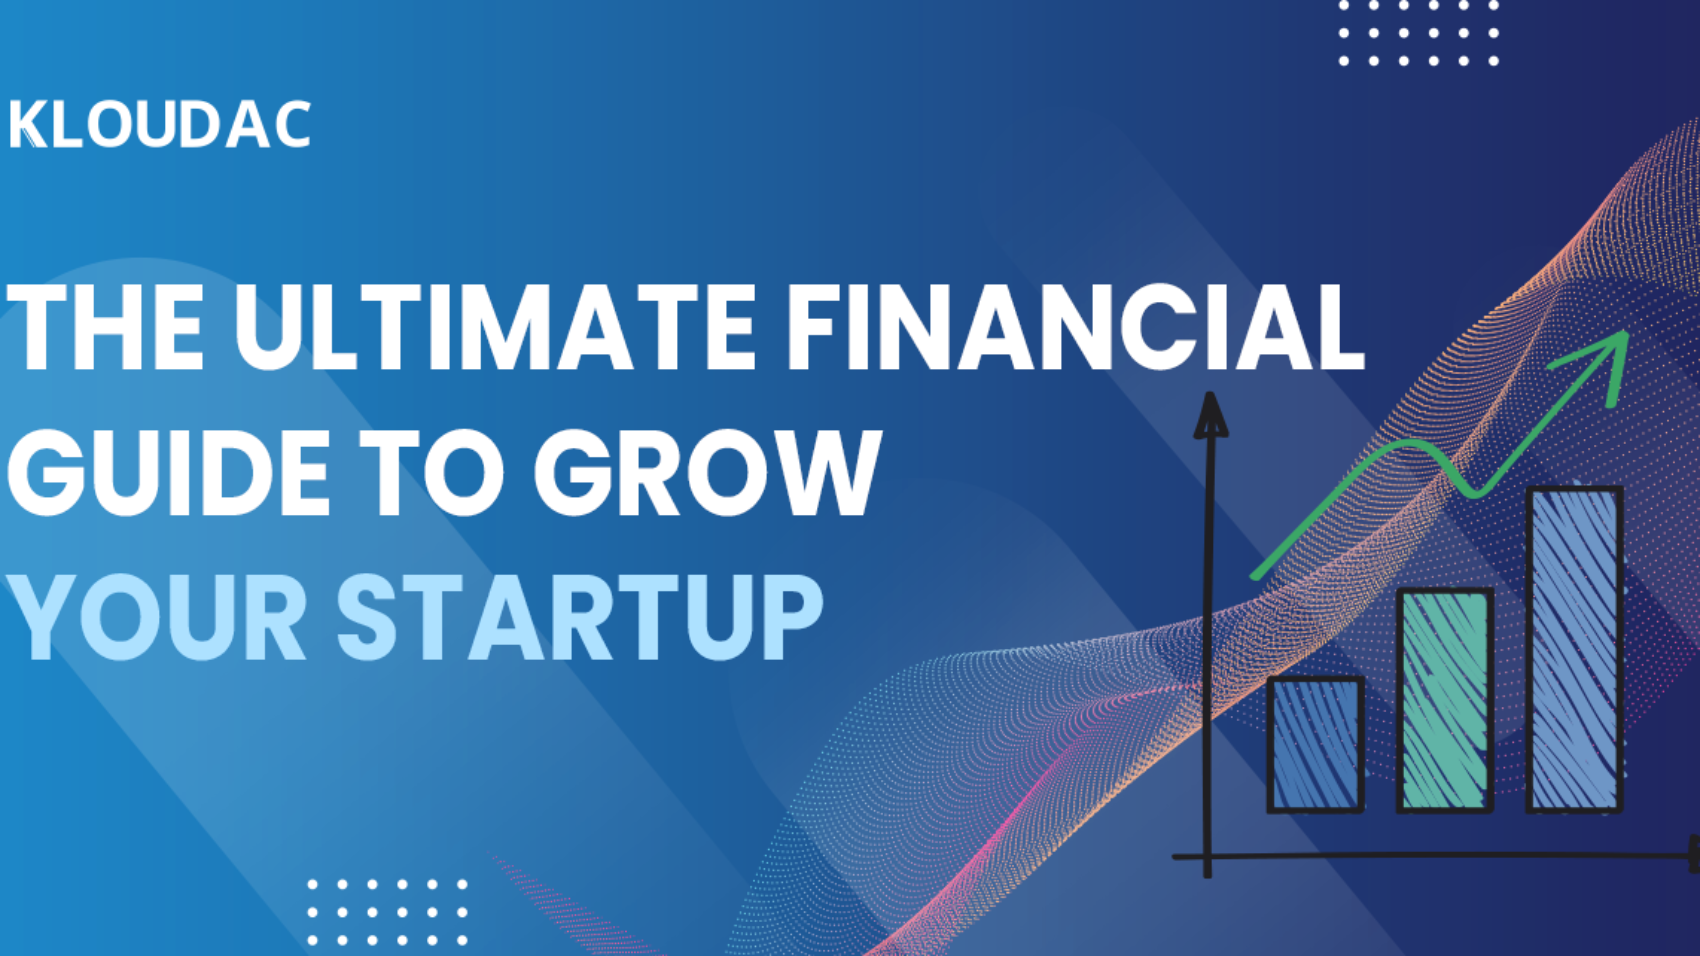 The ultimate financial guide to grow your startup